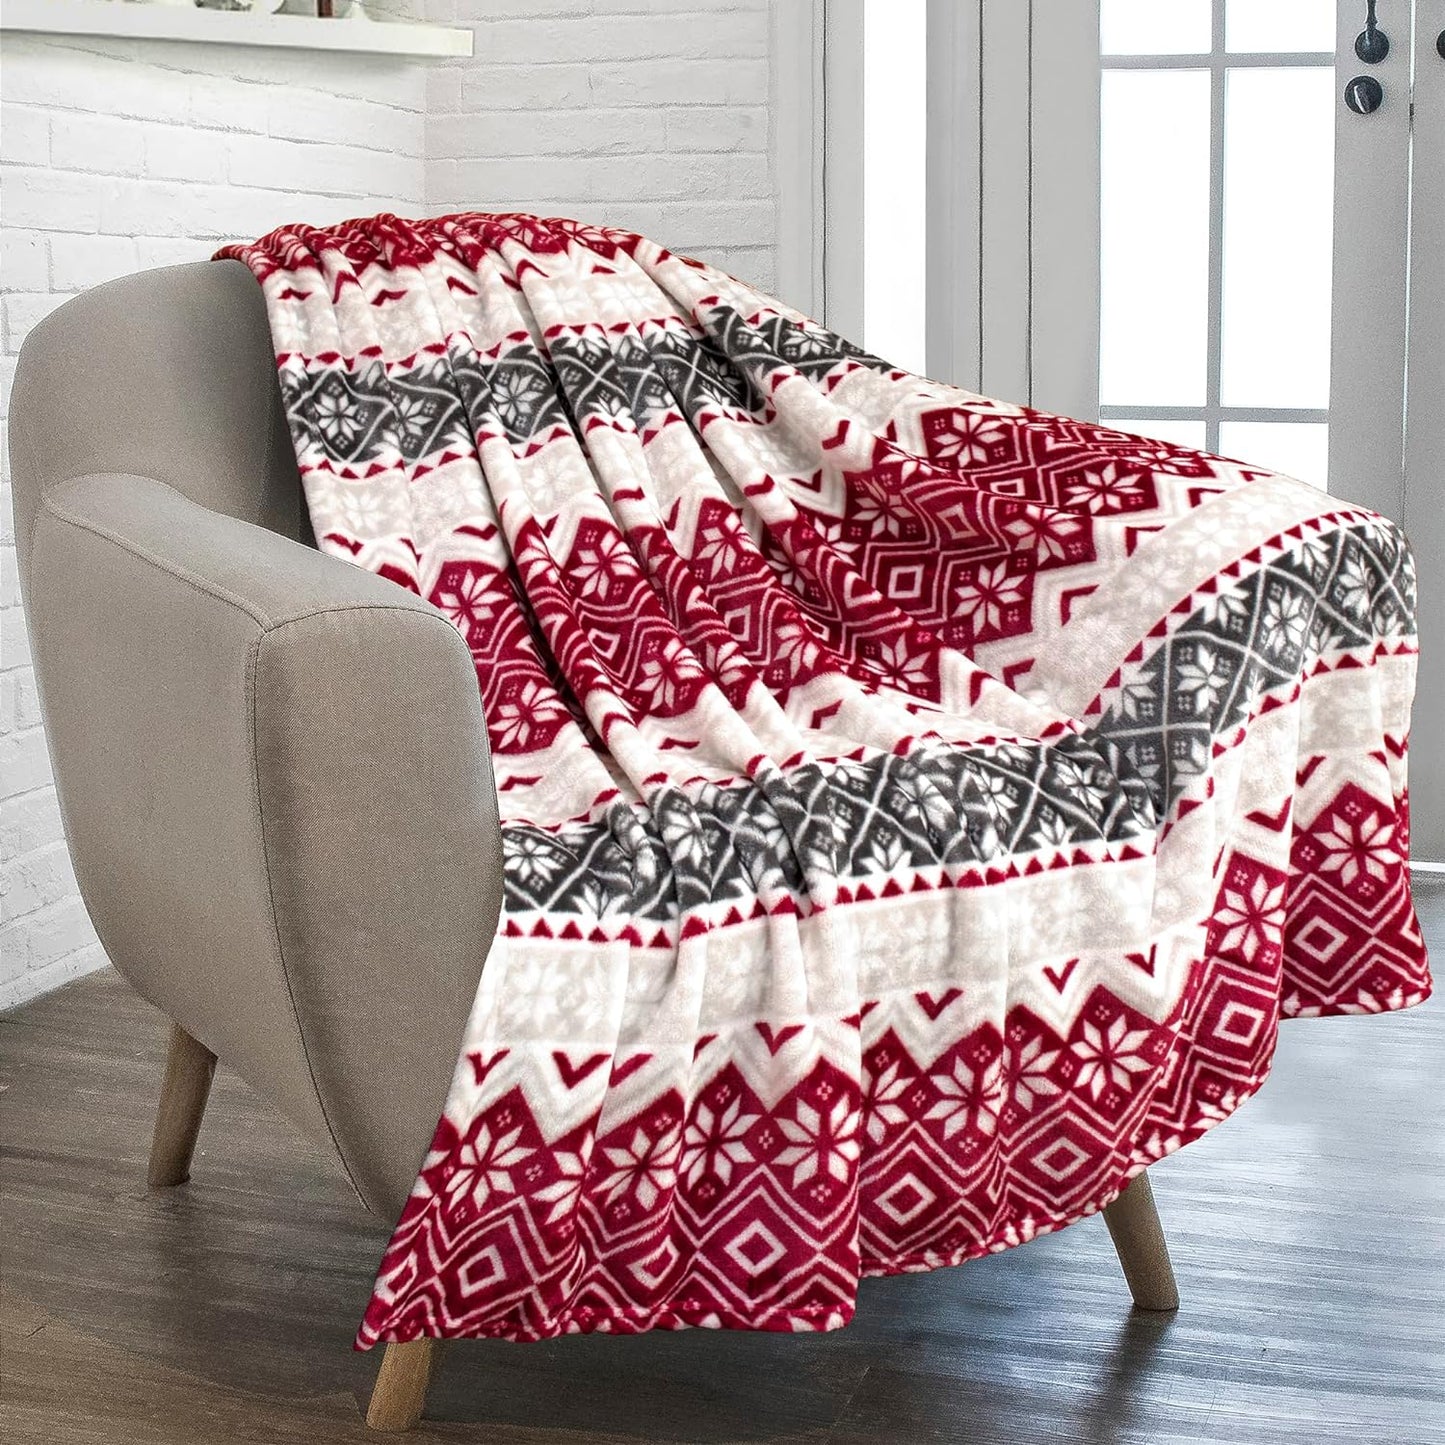 Christmas Throw Blanket | Holiday Christmas Red Fleece Blanket | Soft, Plush, Warm Winter Cabin Throw, 50X60 (Red Snowflakes)